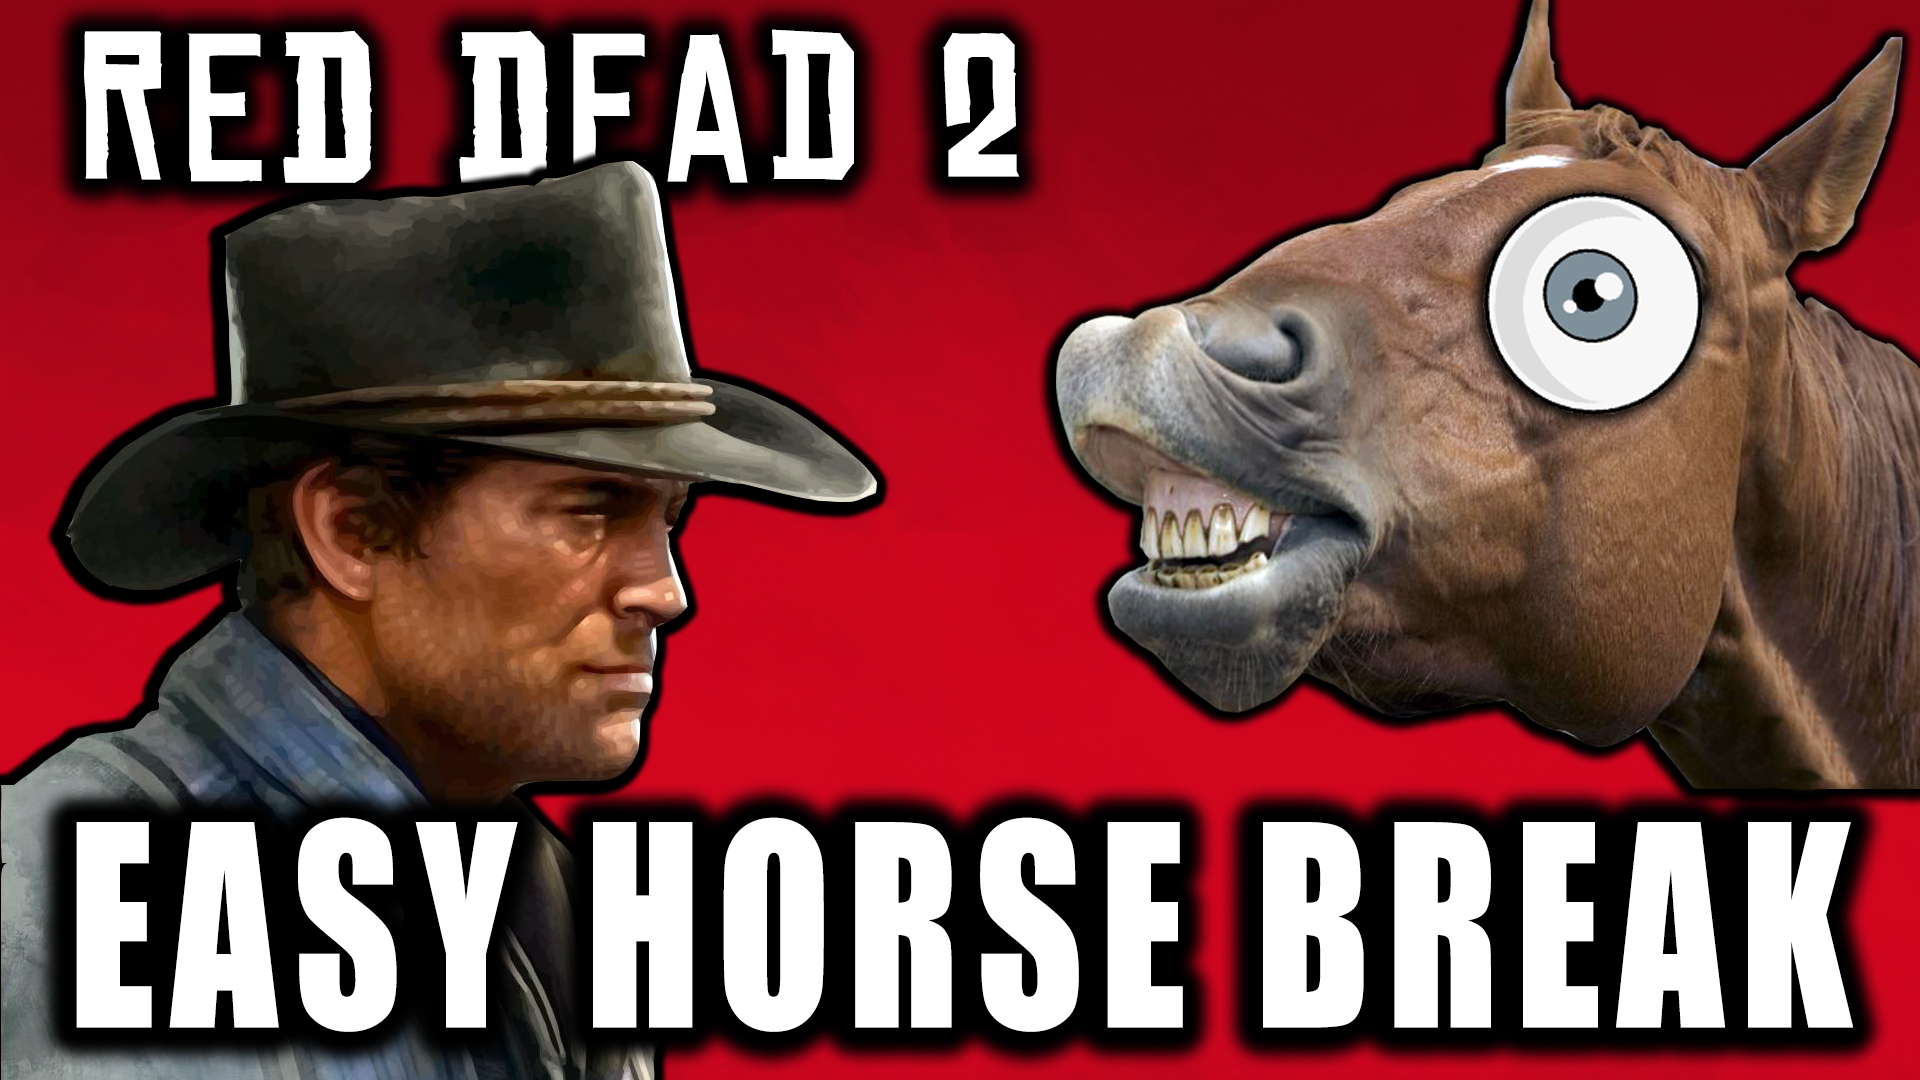 red-dead-redemption-2-easy-horse-break-lord-kayoss